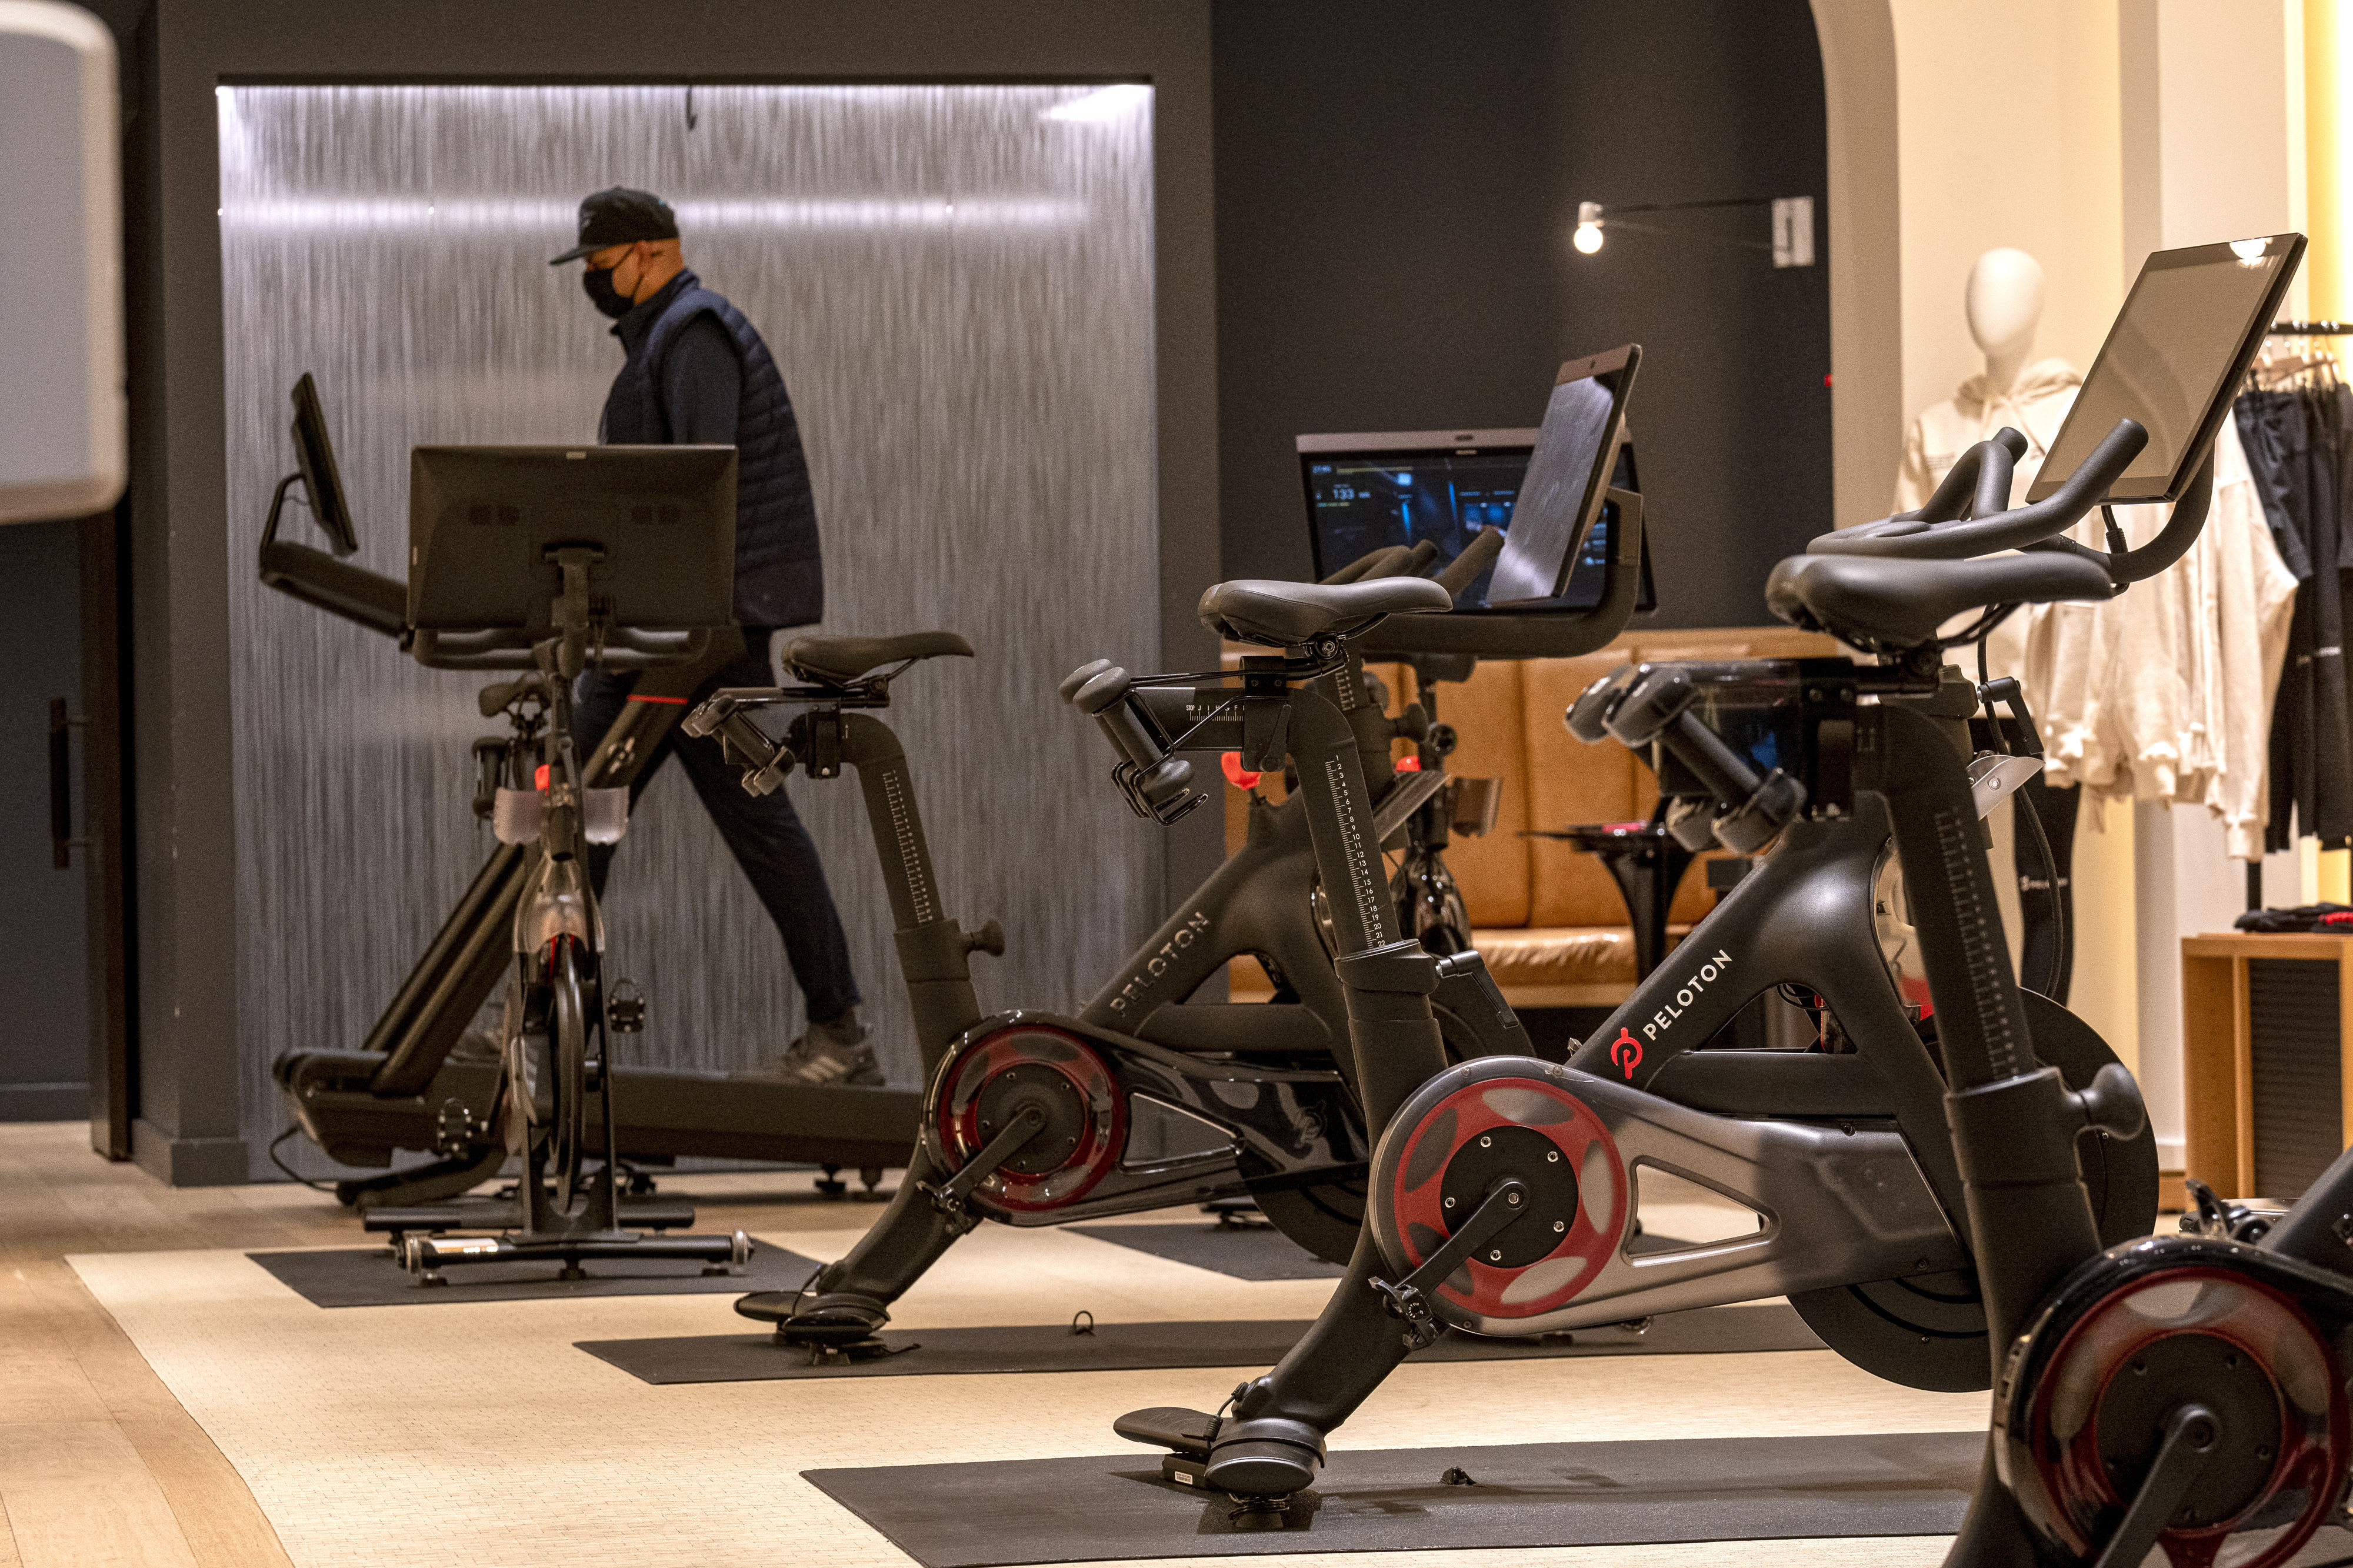 Peloton hit by major outage, company says it's investigating the issue - CNBC